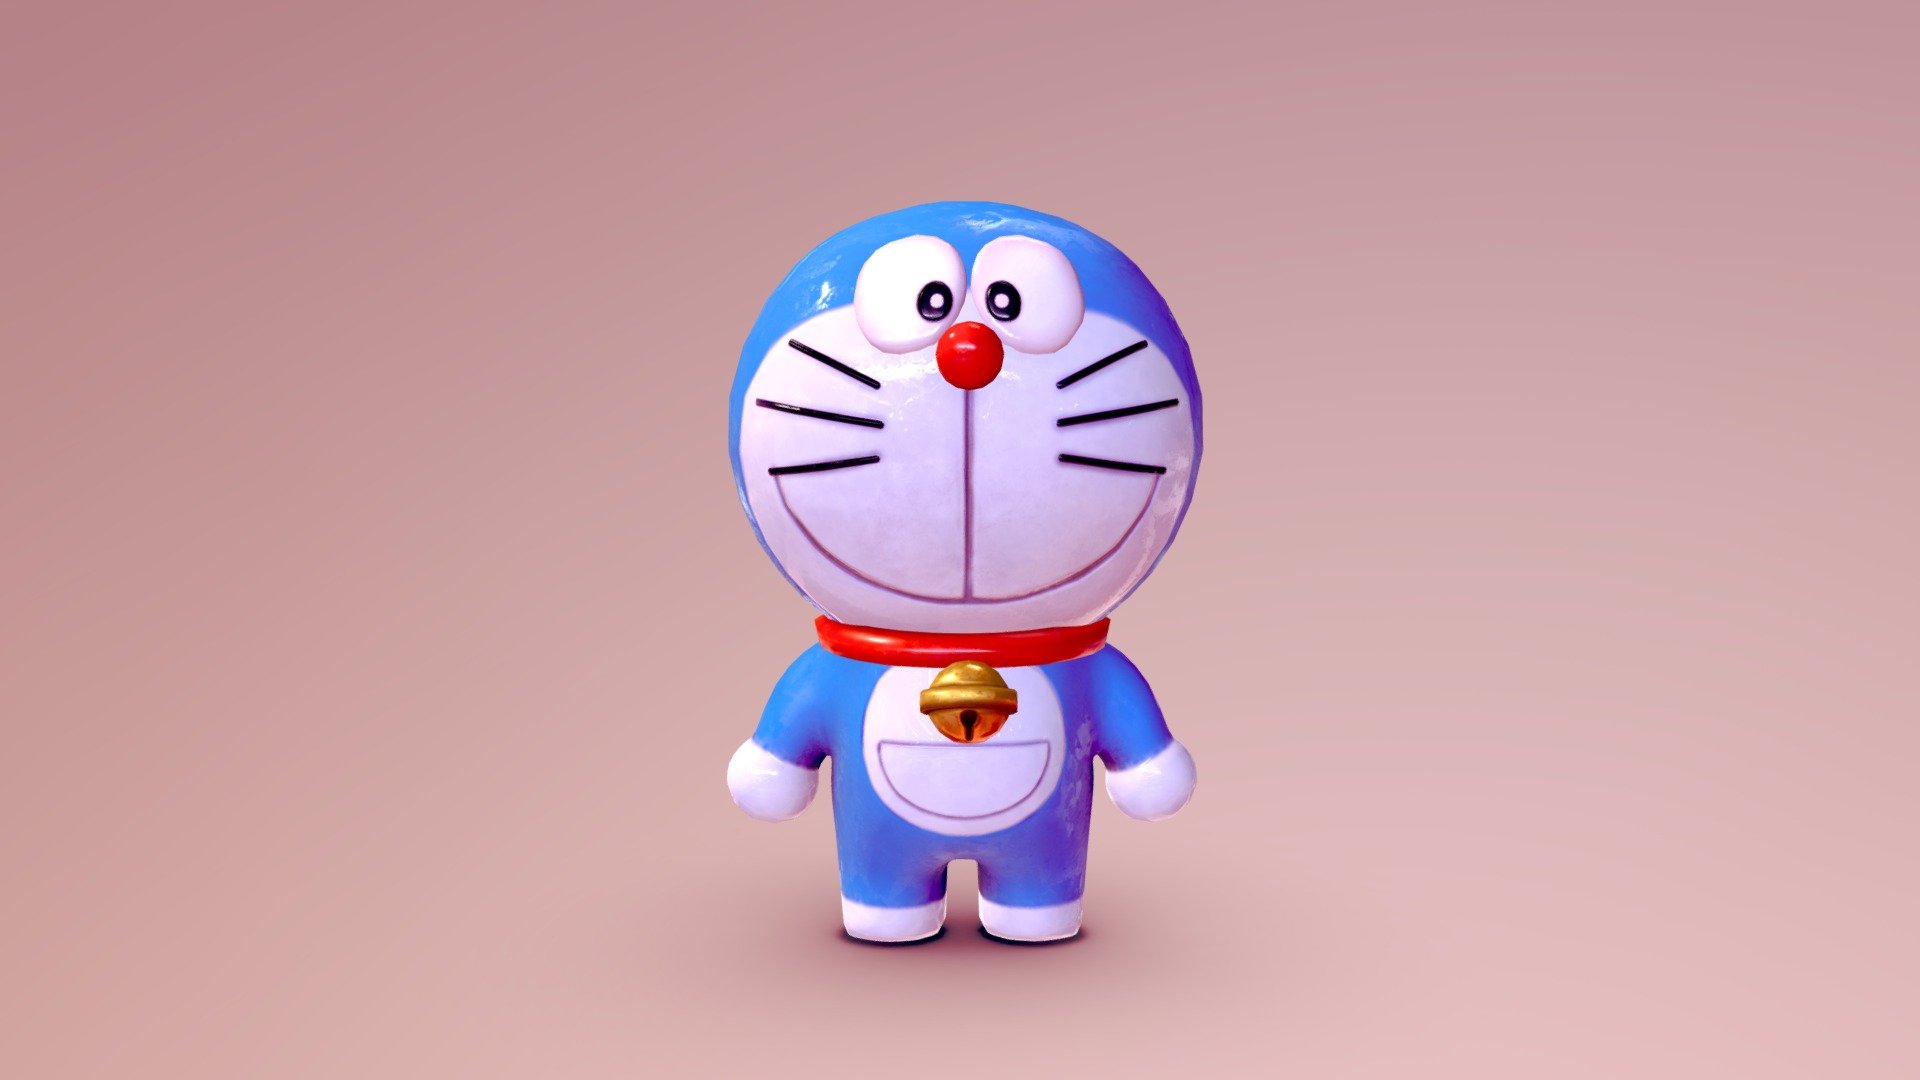 Doraemon figure model in .fbx format.

Asset is low-poly and game-ready. Files are simple to use and well-organized.

Textures included in this product:

Color, ambient occlussion, metalness, roughness, normal map (4k, 2k, 1k).

Make sure to download Additional file. It contains all the textures! Enjoy! - Doraemon - Game-Ready & Low-Poly Figure - Buy Royalty Free 3D model by Werqa 3d model